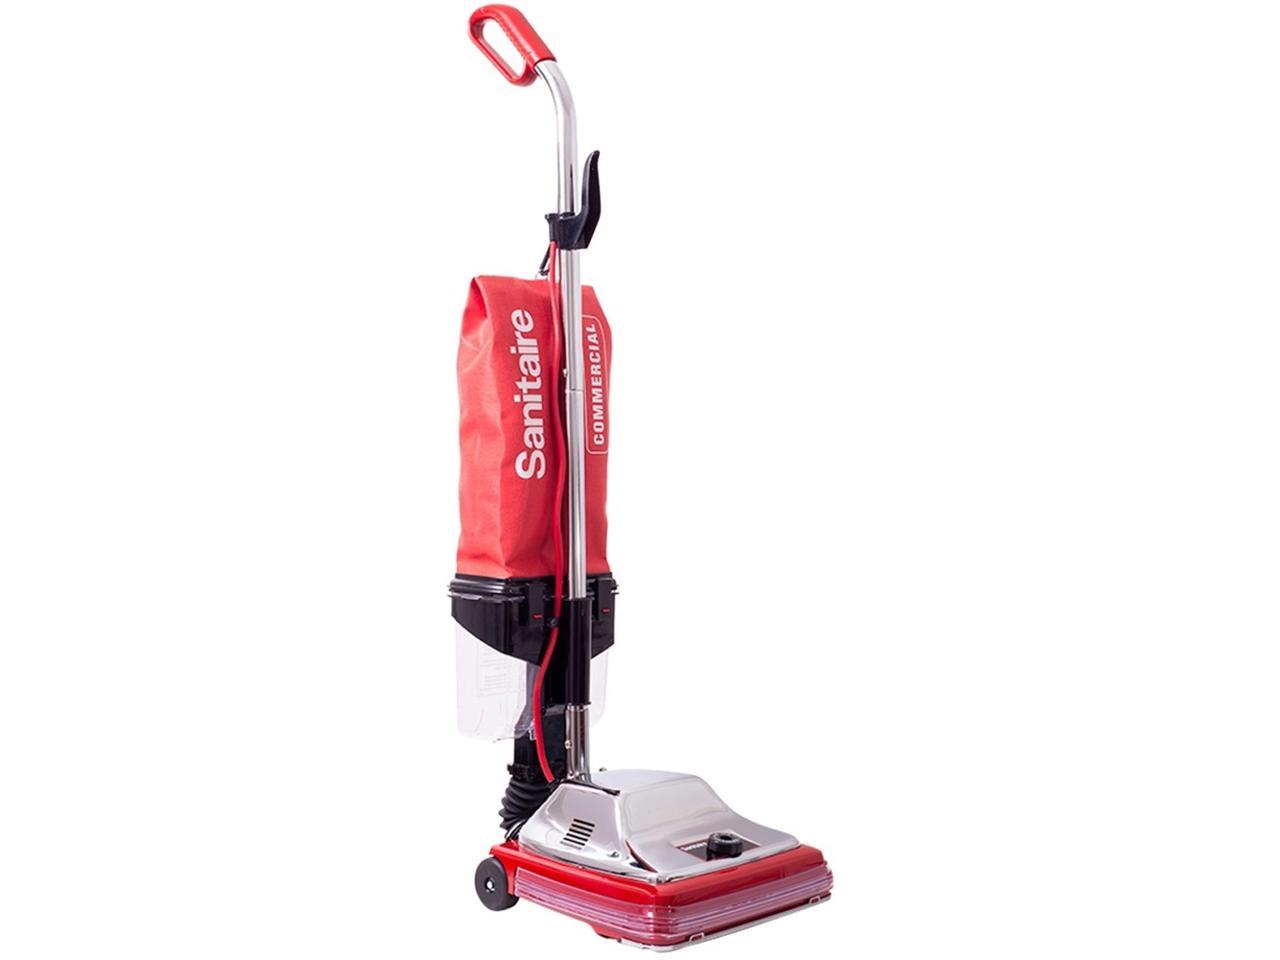 Sanitaire SC887E SC887 Tradition Upright Vacuum Red - image 2 of 2